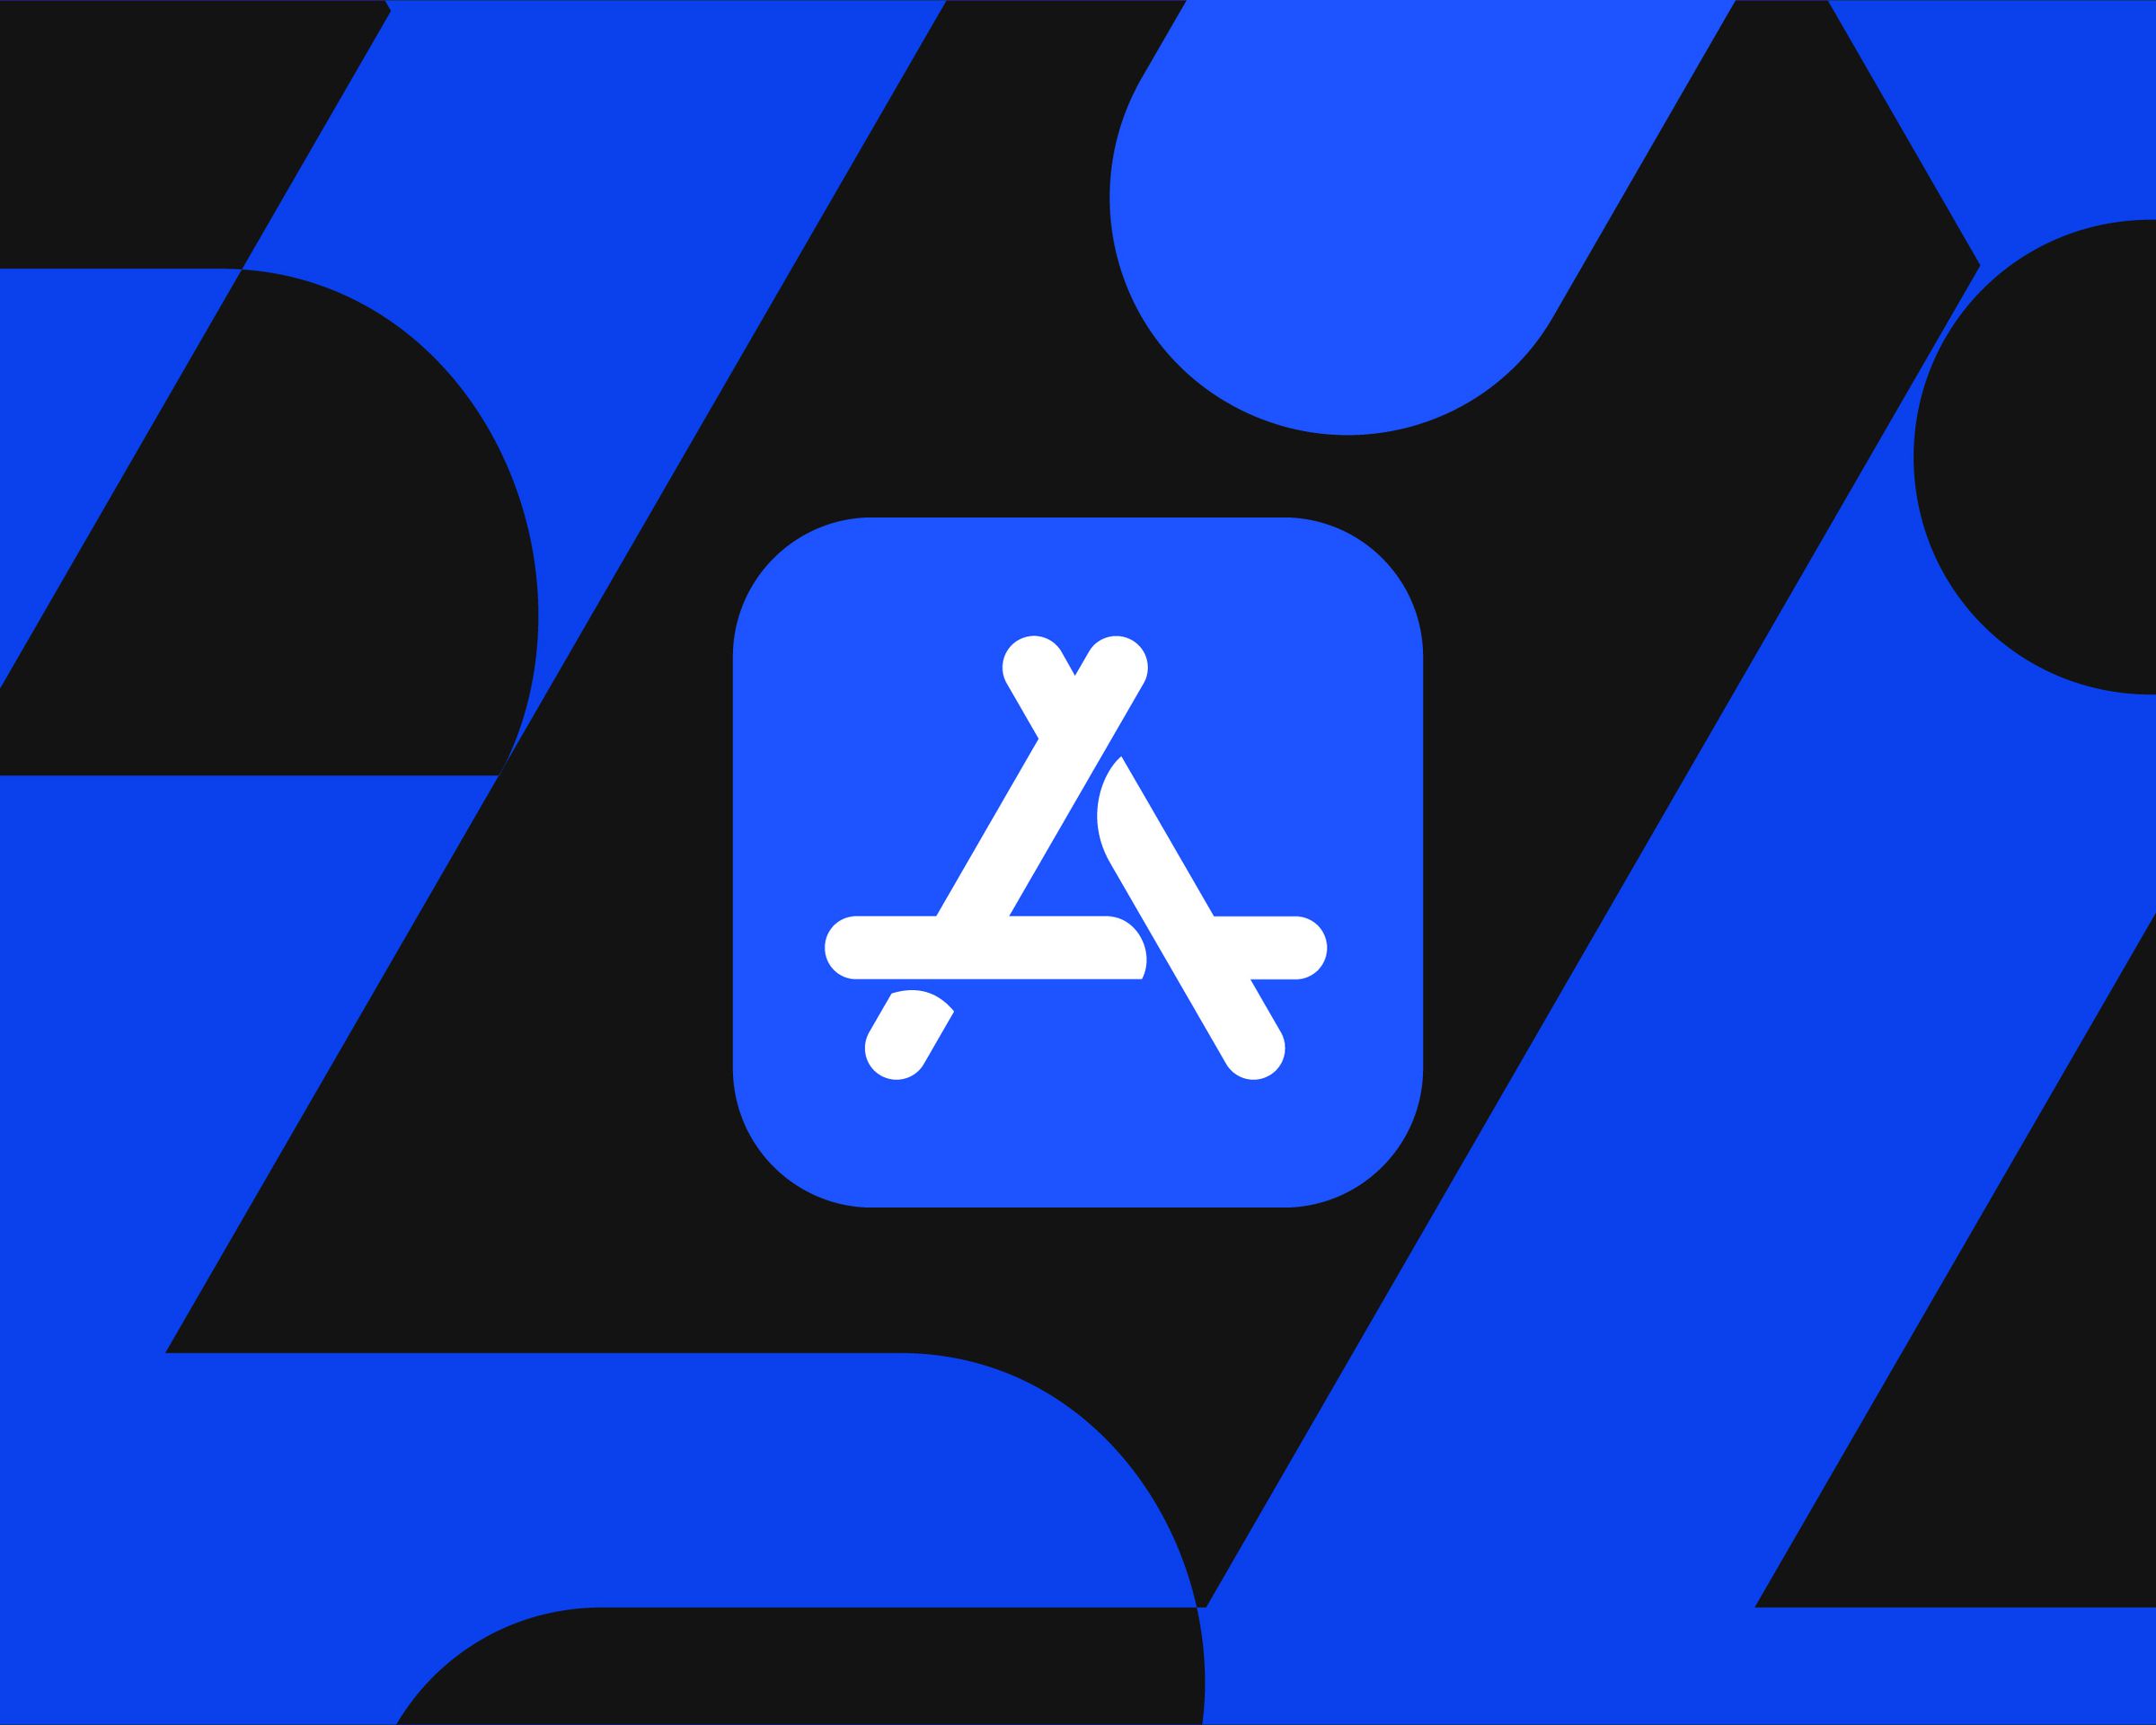 Illustration of the App Store logo on a dark black and blue background.